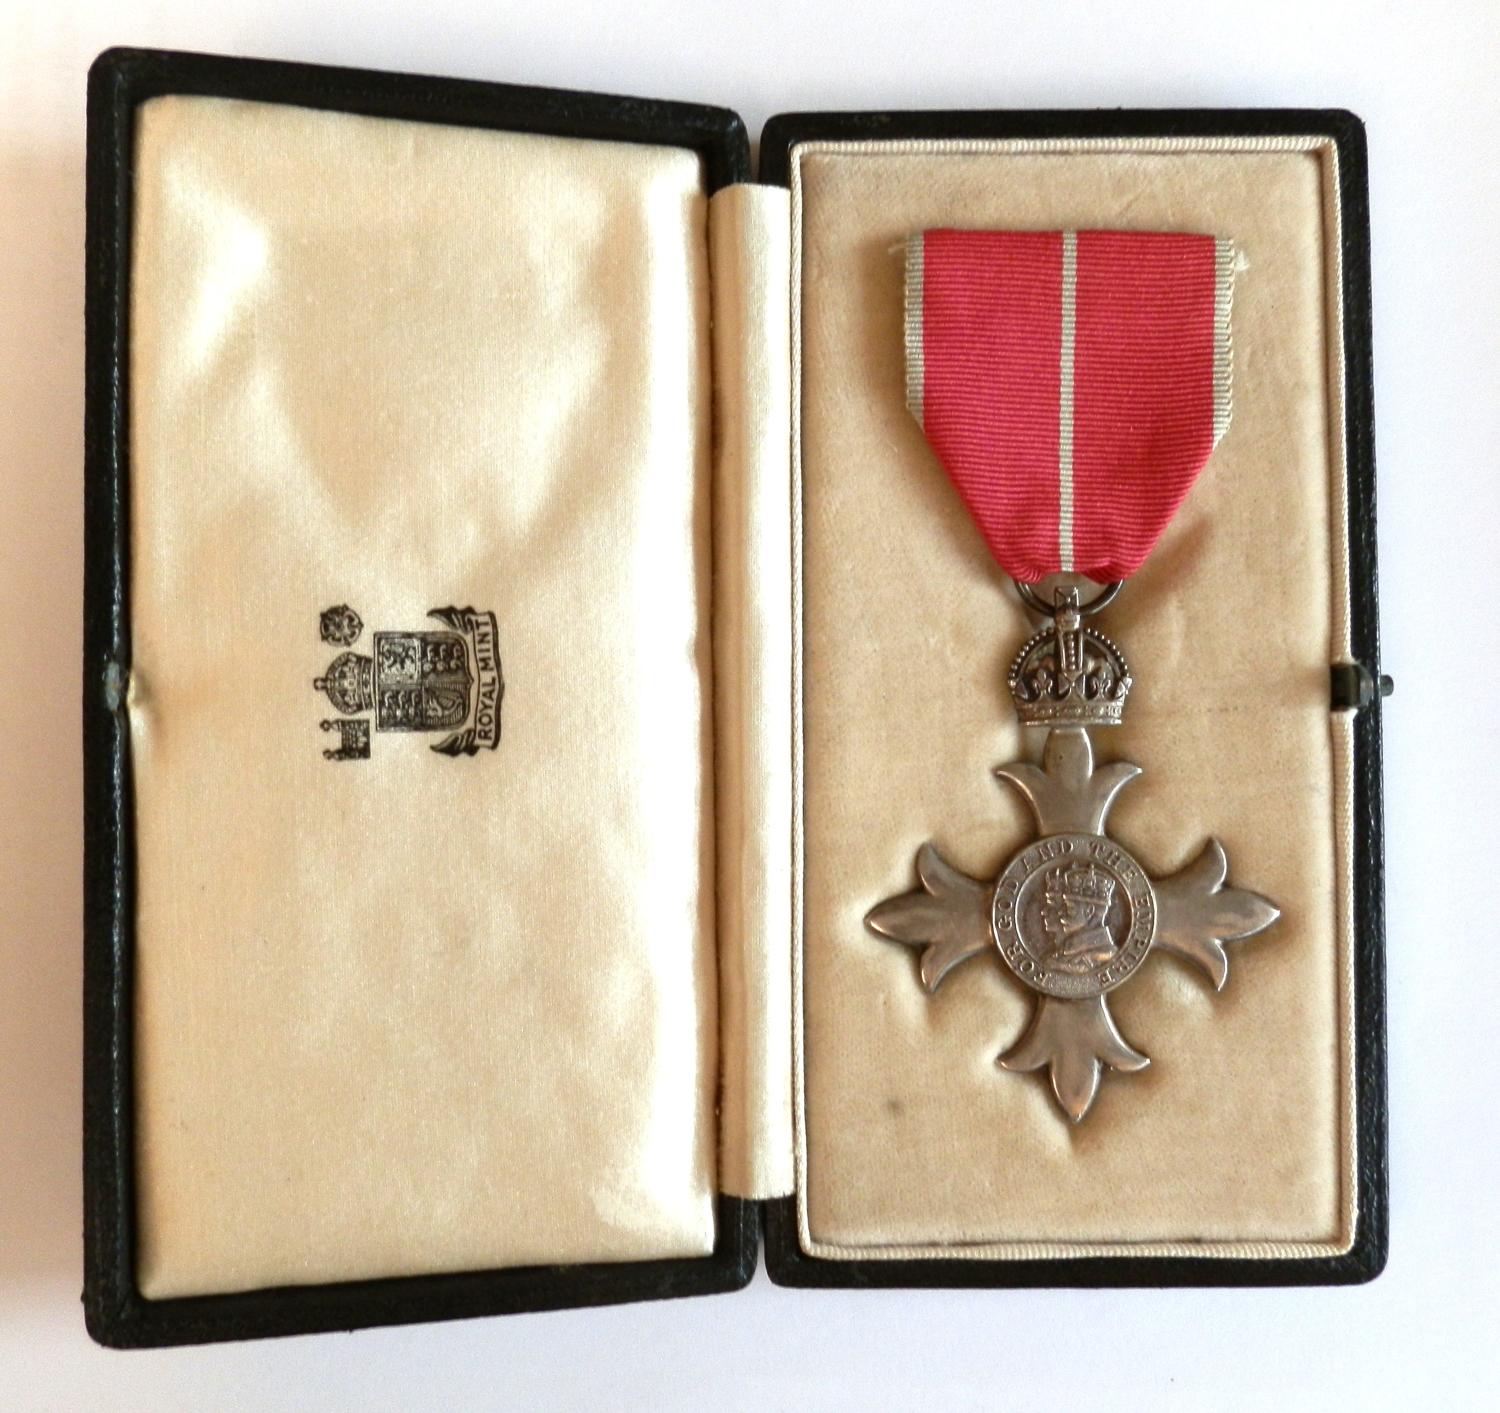 Most Excellent Order of the British Empire (Military) 2nd Type.